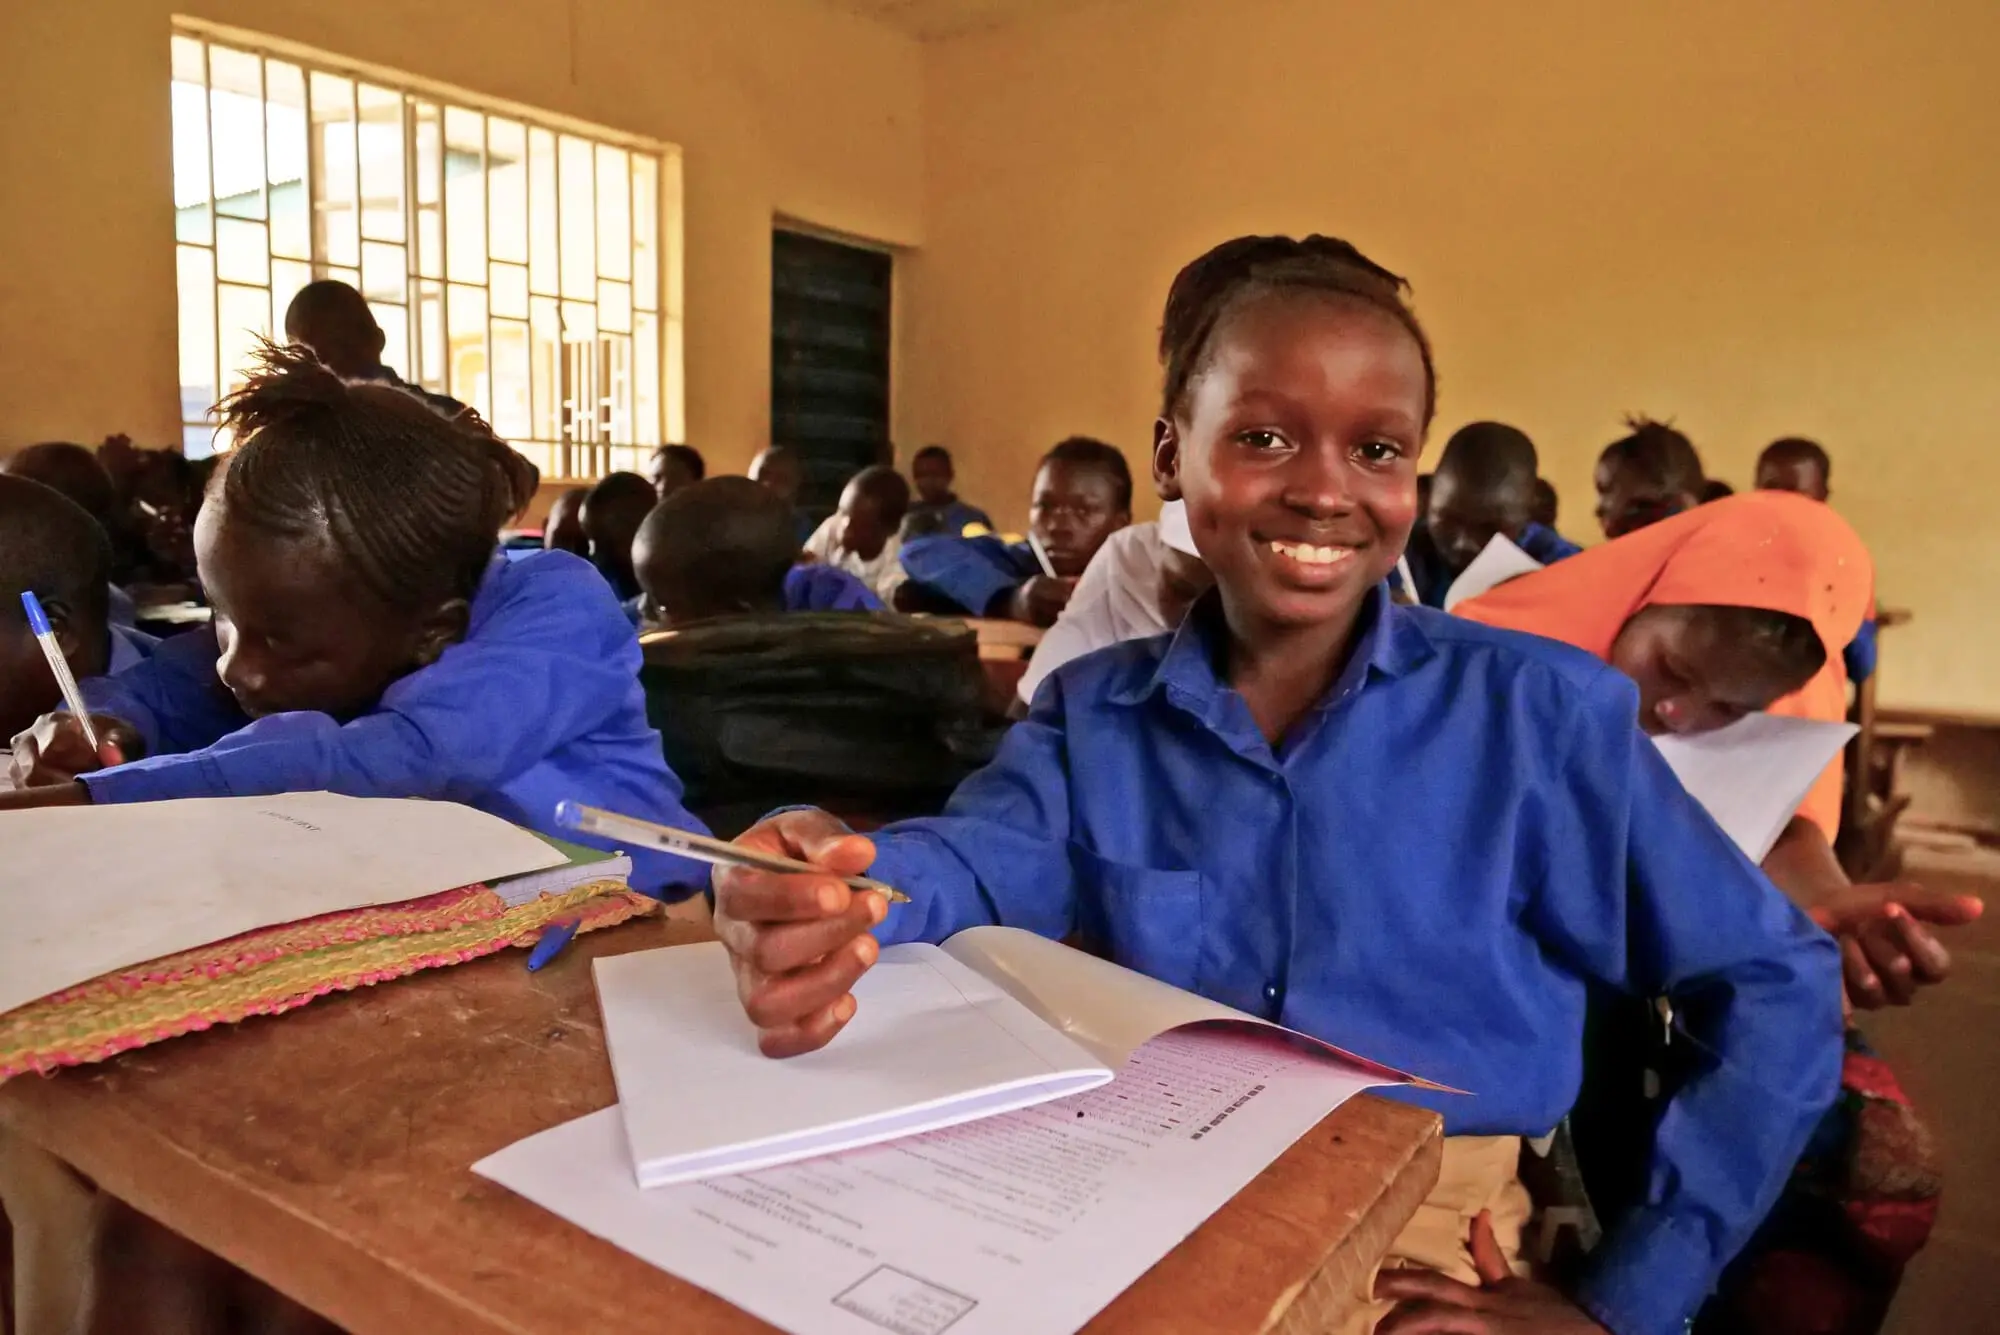 A young student during a school lesson in Masakong, Sierra Leone